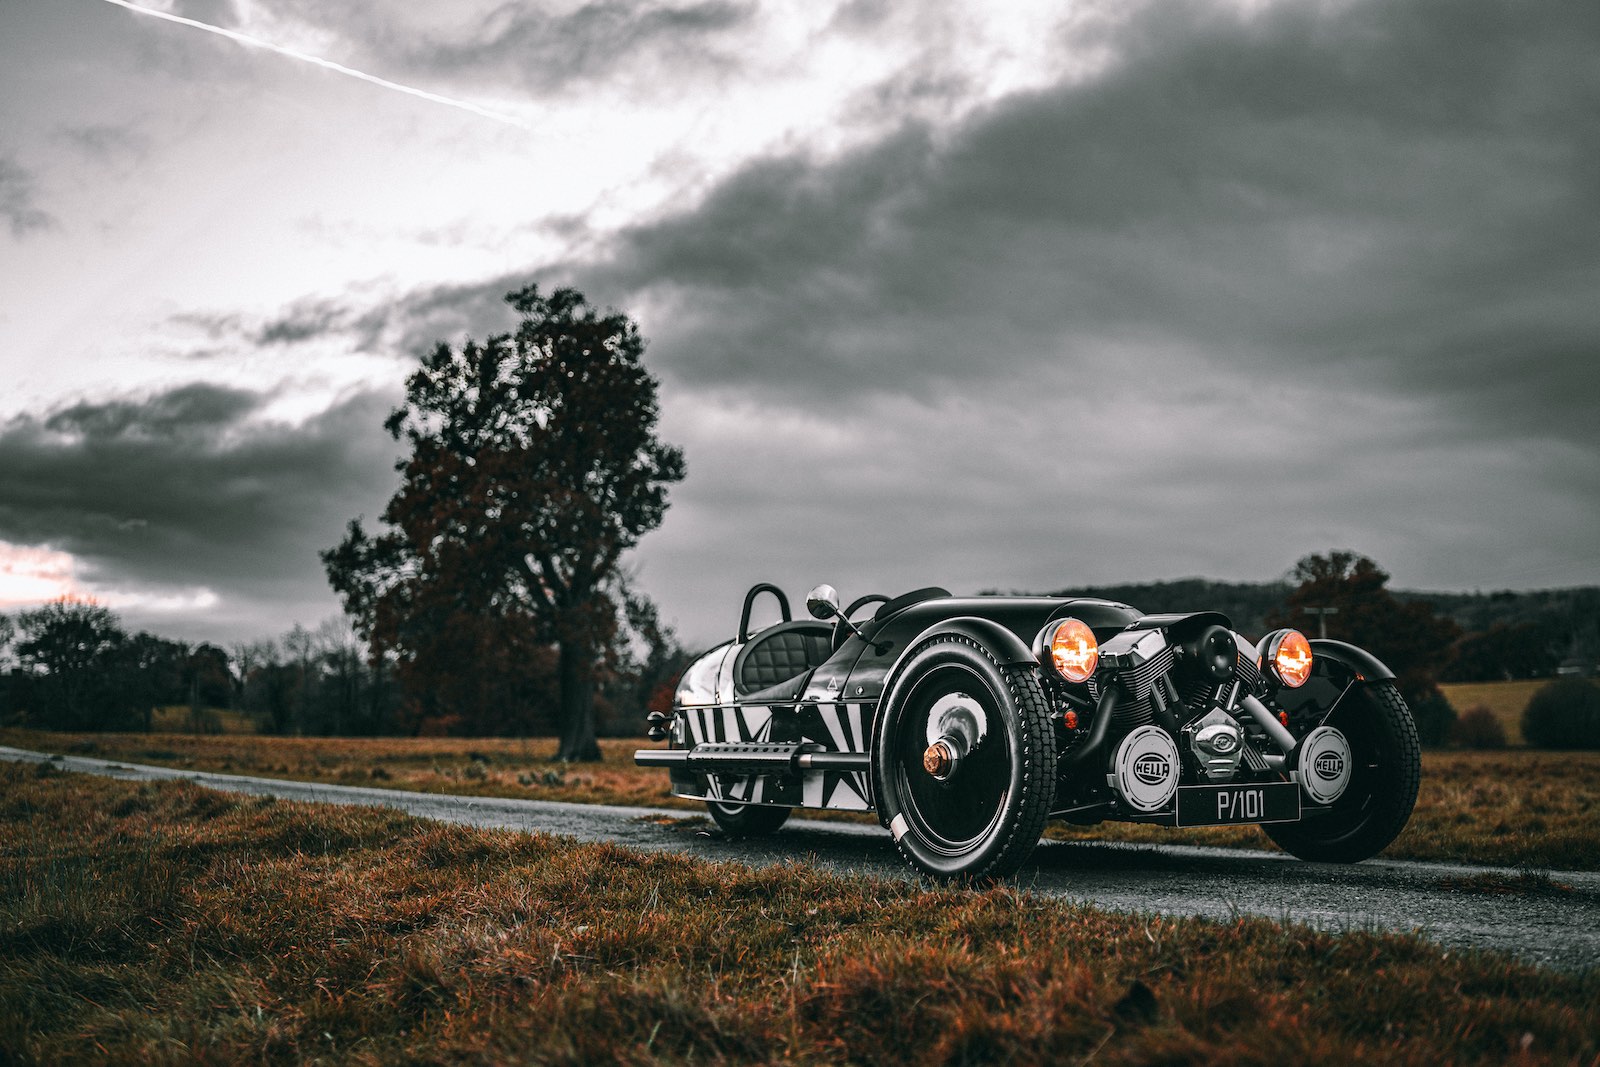 Morgan unveils new 3 Wheeler P101 Limited Edition